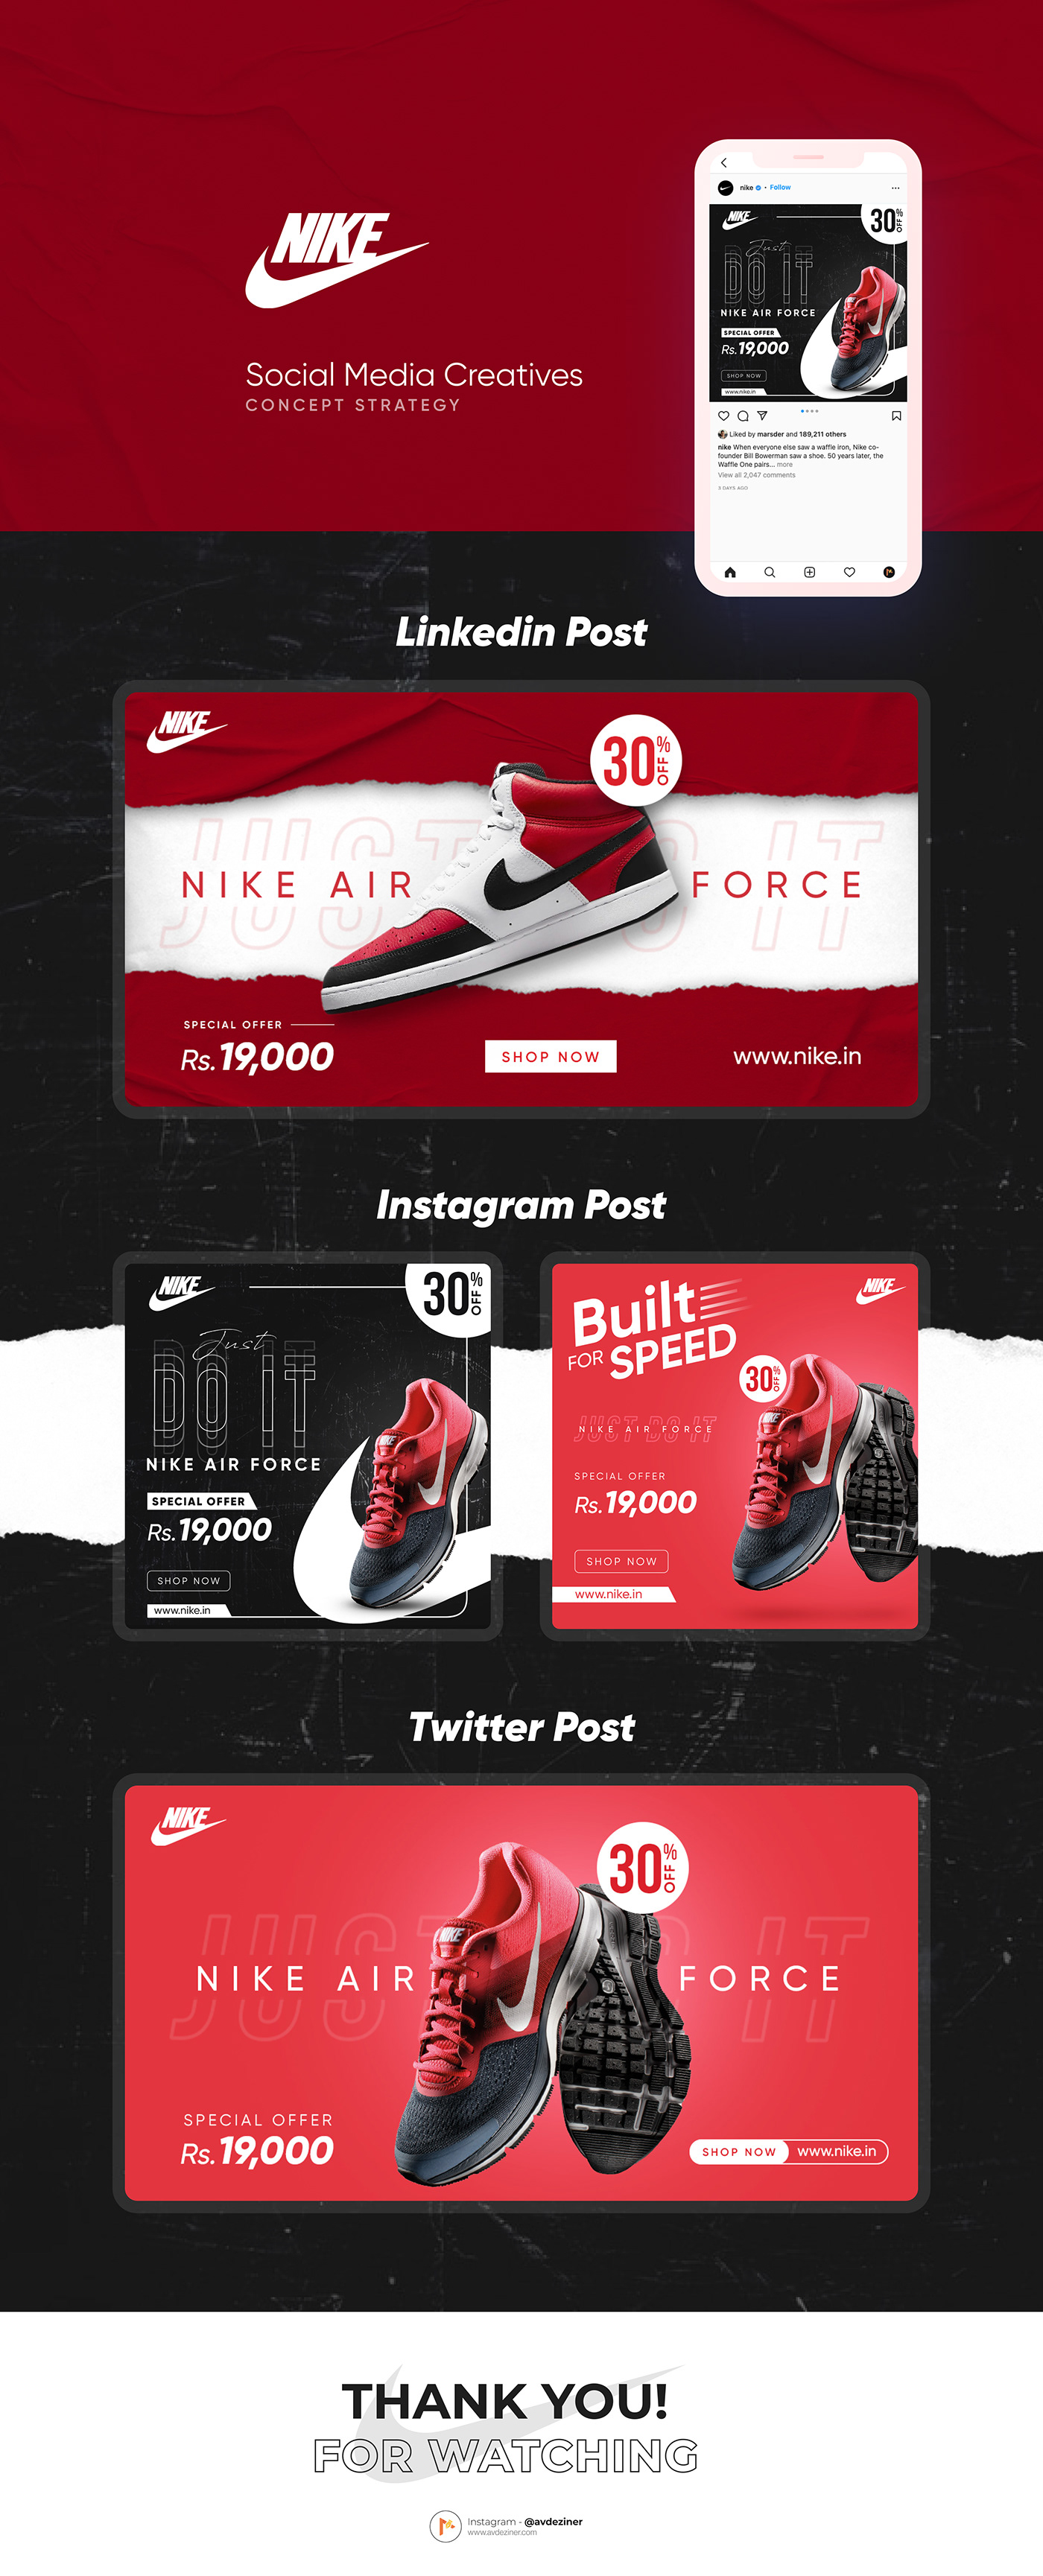 Advertising  Instagram Post nike poster Nike Shoes photoshop SHOES BANNER shoes design sm post Social Media Design Social Media Post Design